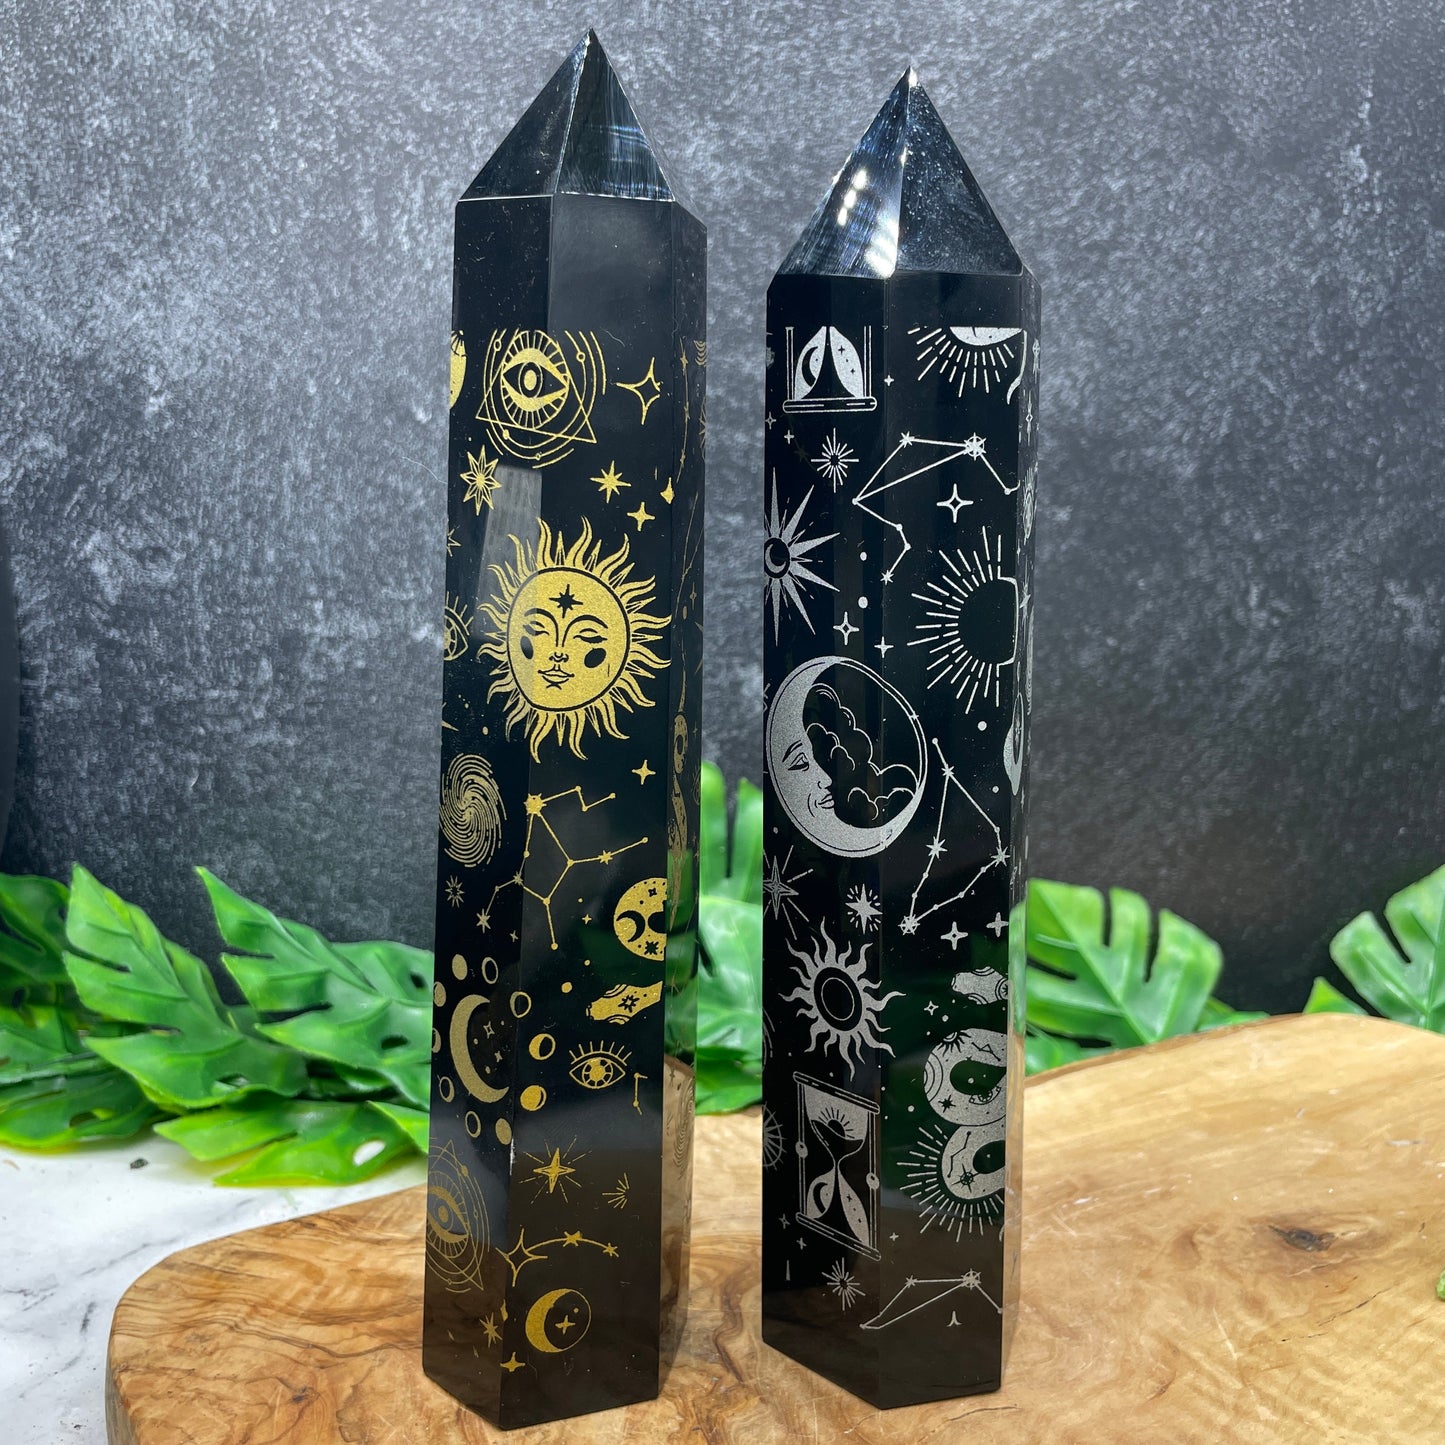 Black Obsidian Cosmic Etched Tower